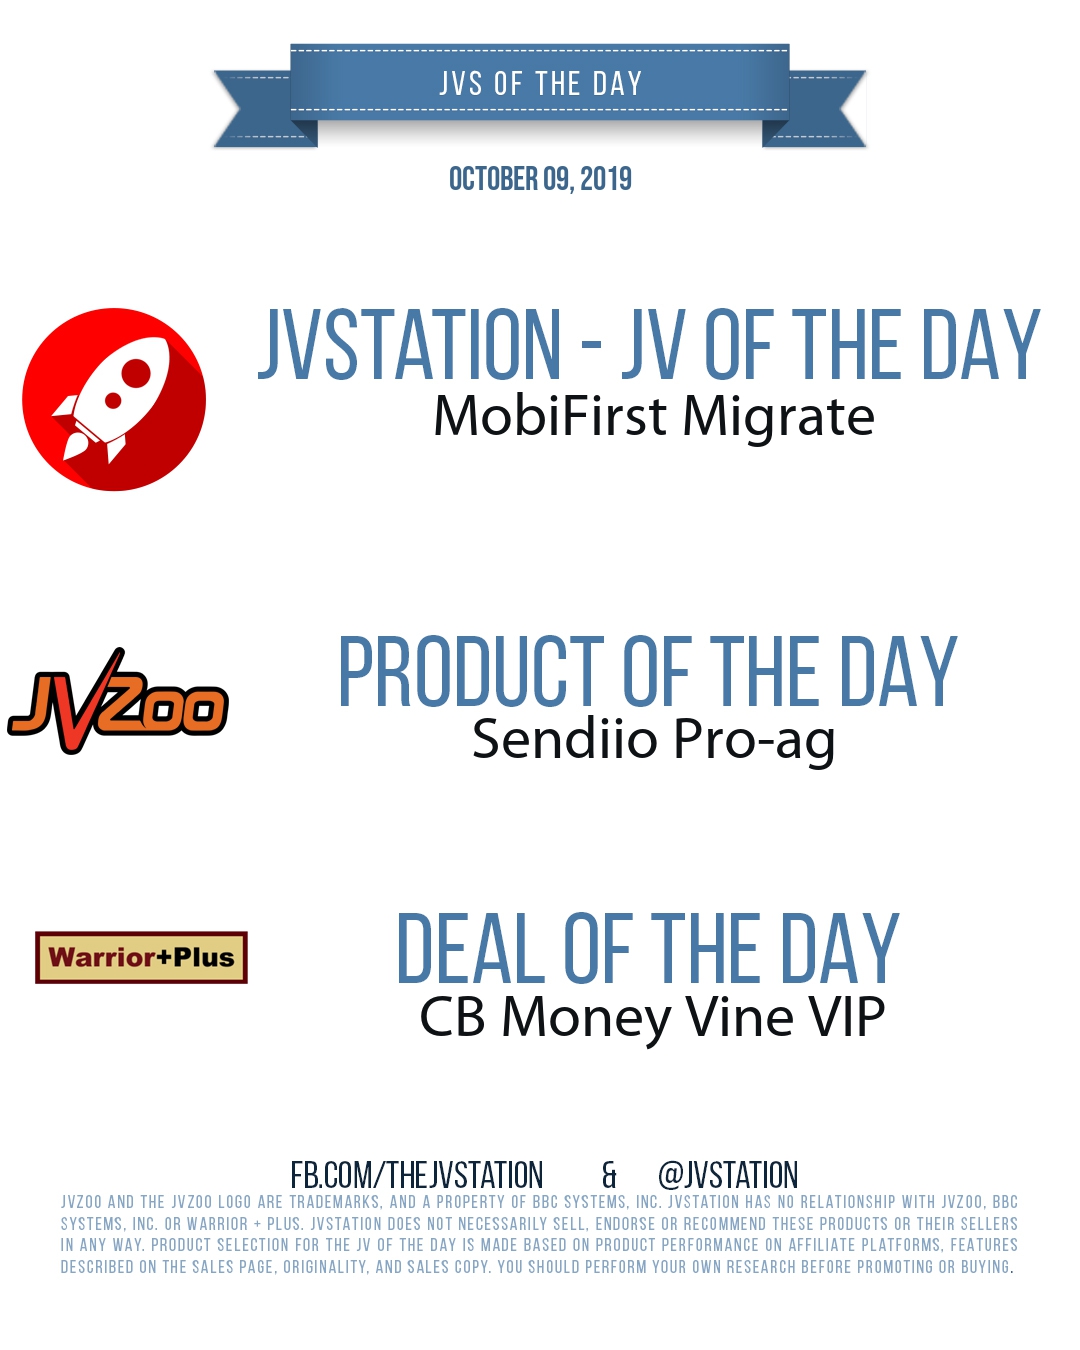 JVs of the day - October 09, 2019